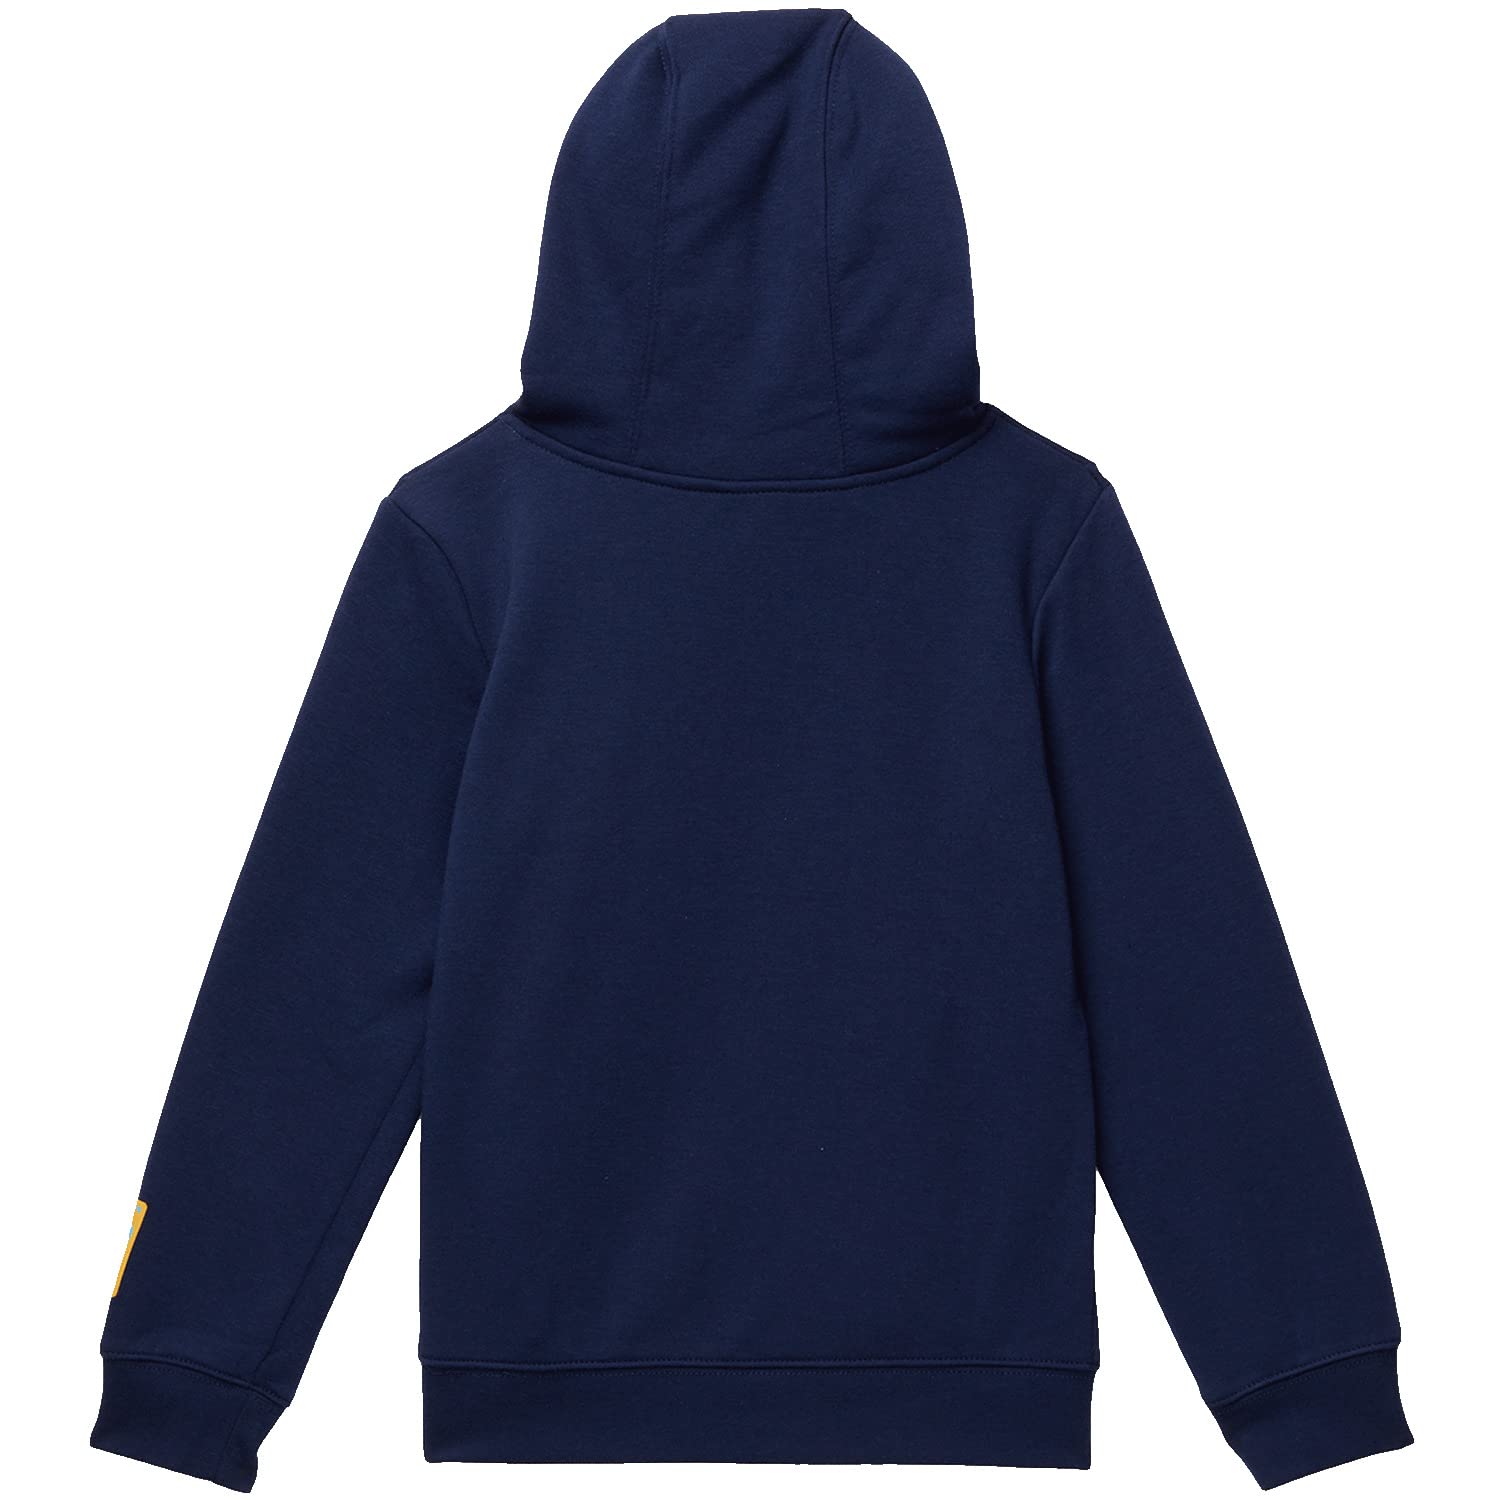 Image 2 of NSW Great Outdoors Fleece Pullover (Toddler/Little Kids/Big Kids)